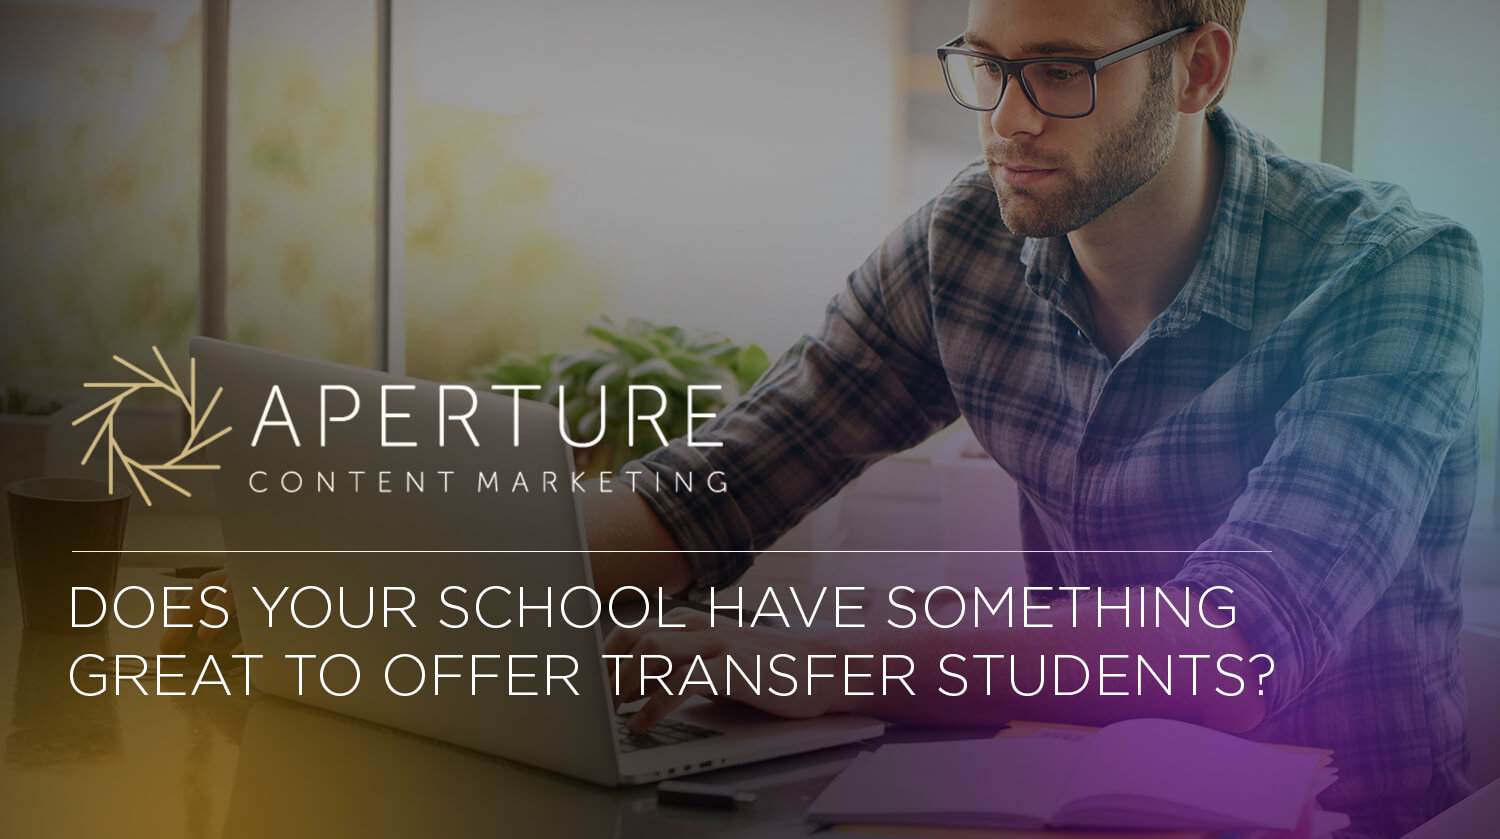 Does your school have something great to offer transfer students?